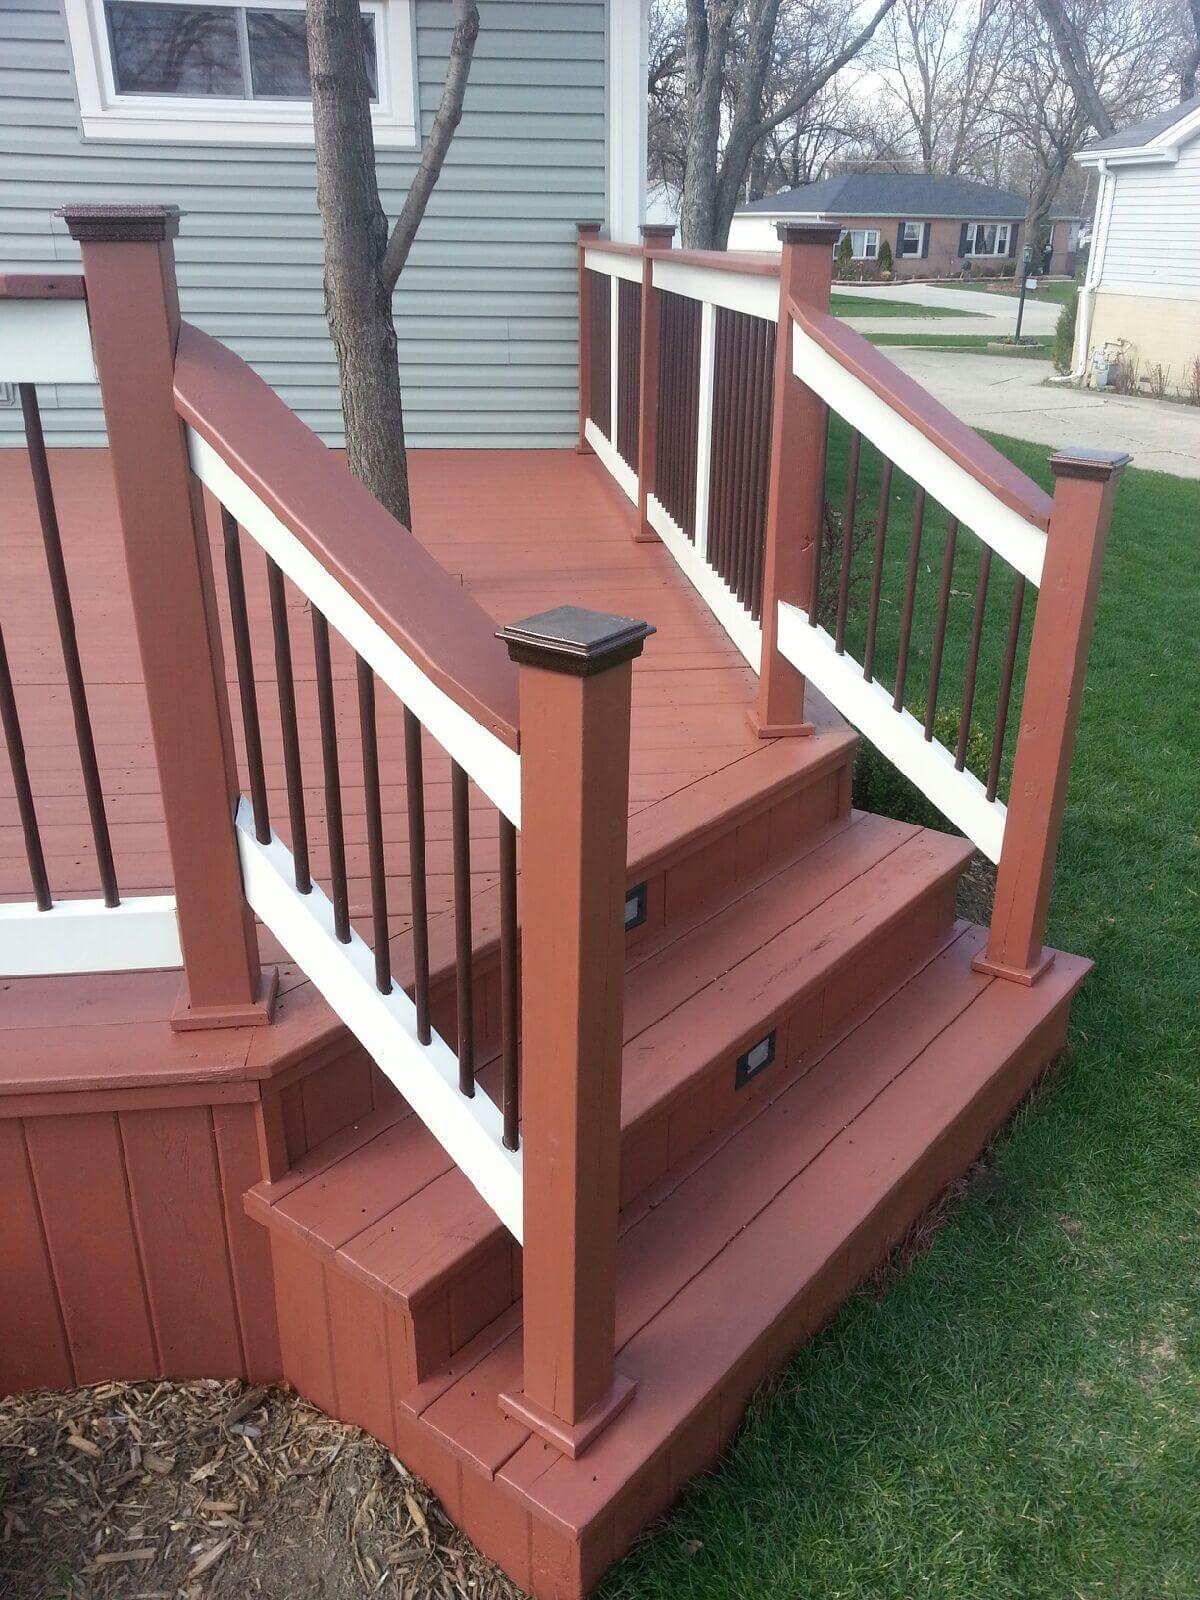 Repairs and maintenance for your deck, fence, and exterior wood staining. - Deck Staining Schaumburg - Deck Cleaning Services